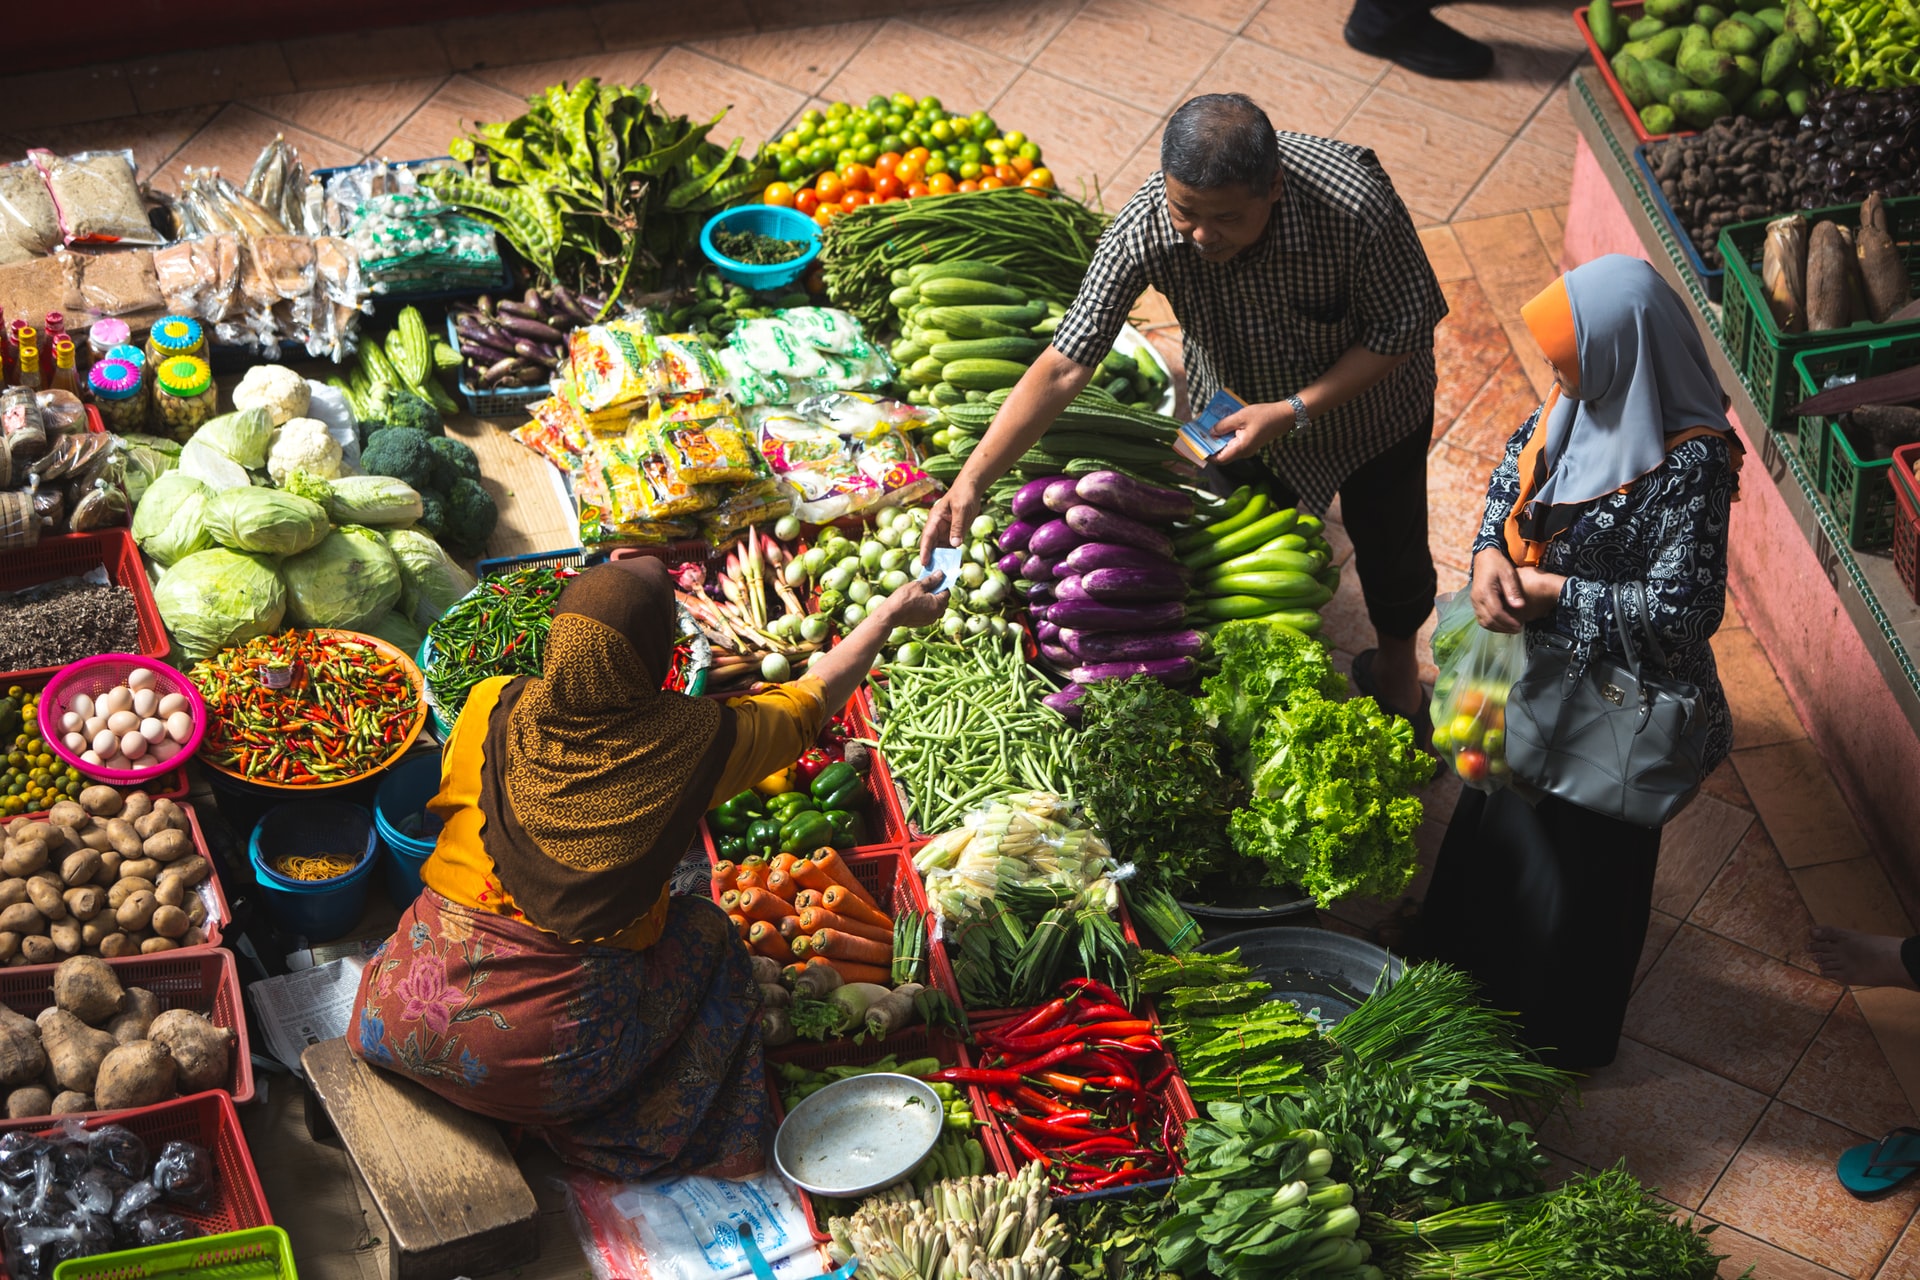 Addressing food insecurity during the COVID-19 pandemic